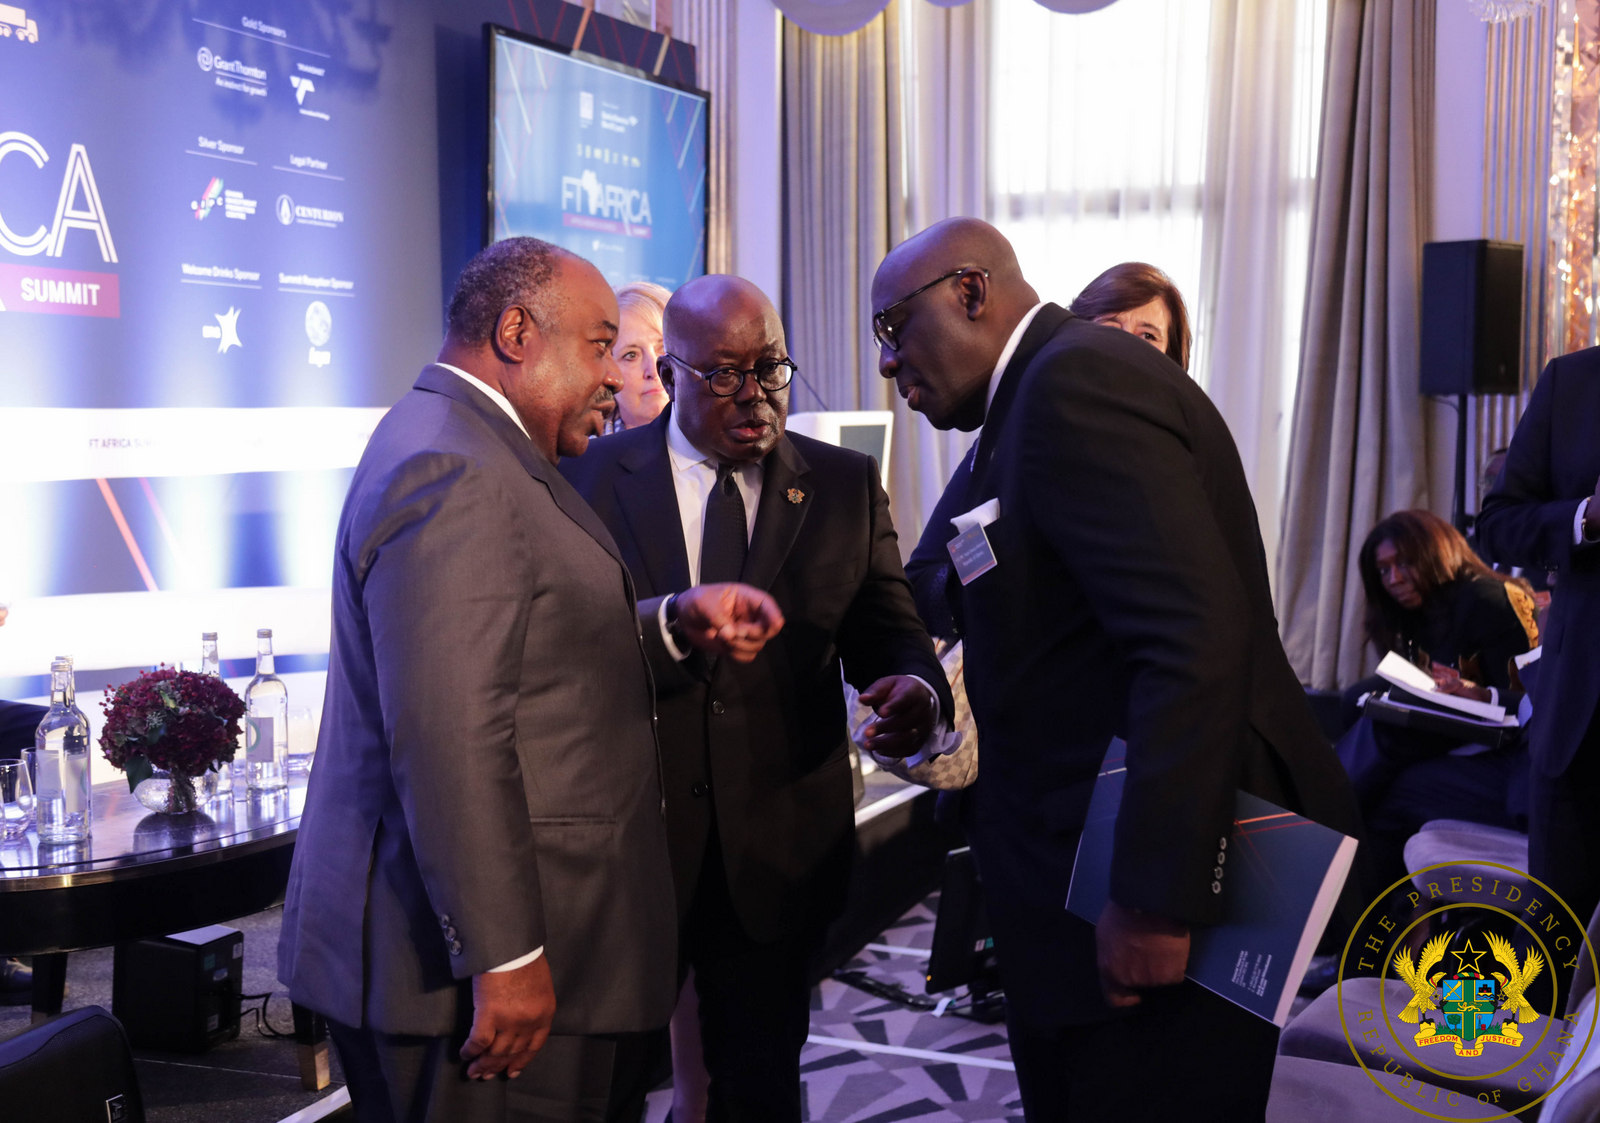 President Akufo-Addo interacting with the President of Gabon Omar Bongo and Ghana's High Commissioner to the UK Papa Owusu Ankomah